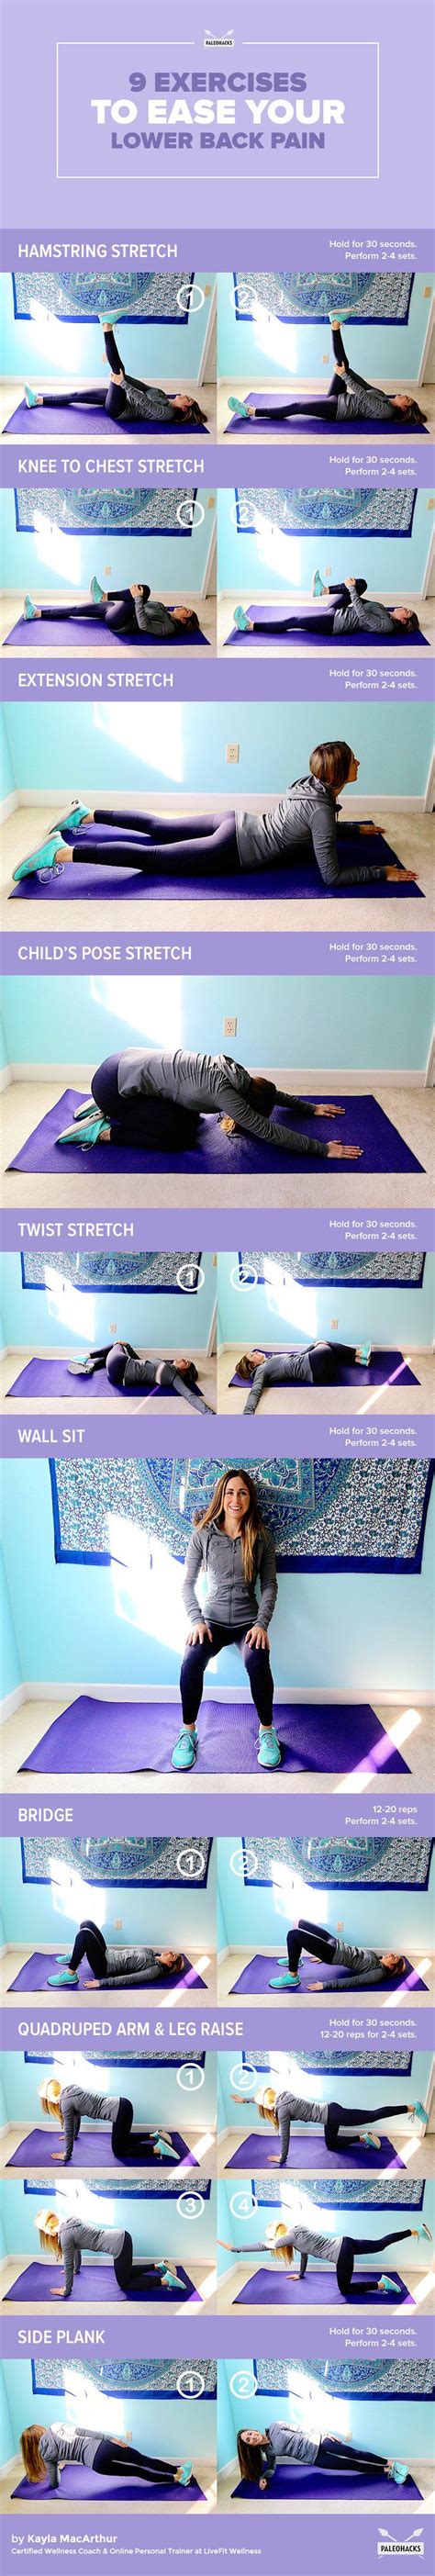 9 Exercises To Ease Your Lower Back Pain Fitness Workouts Yoga Fitness